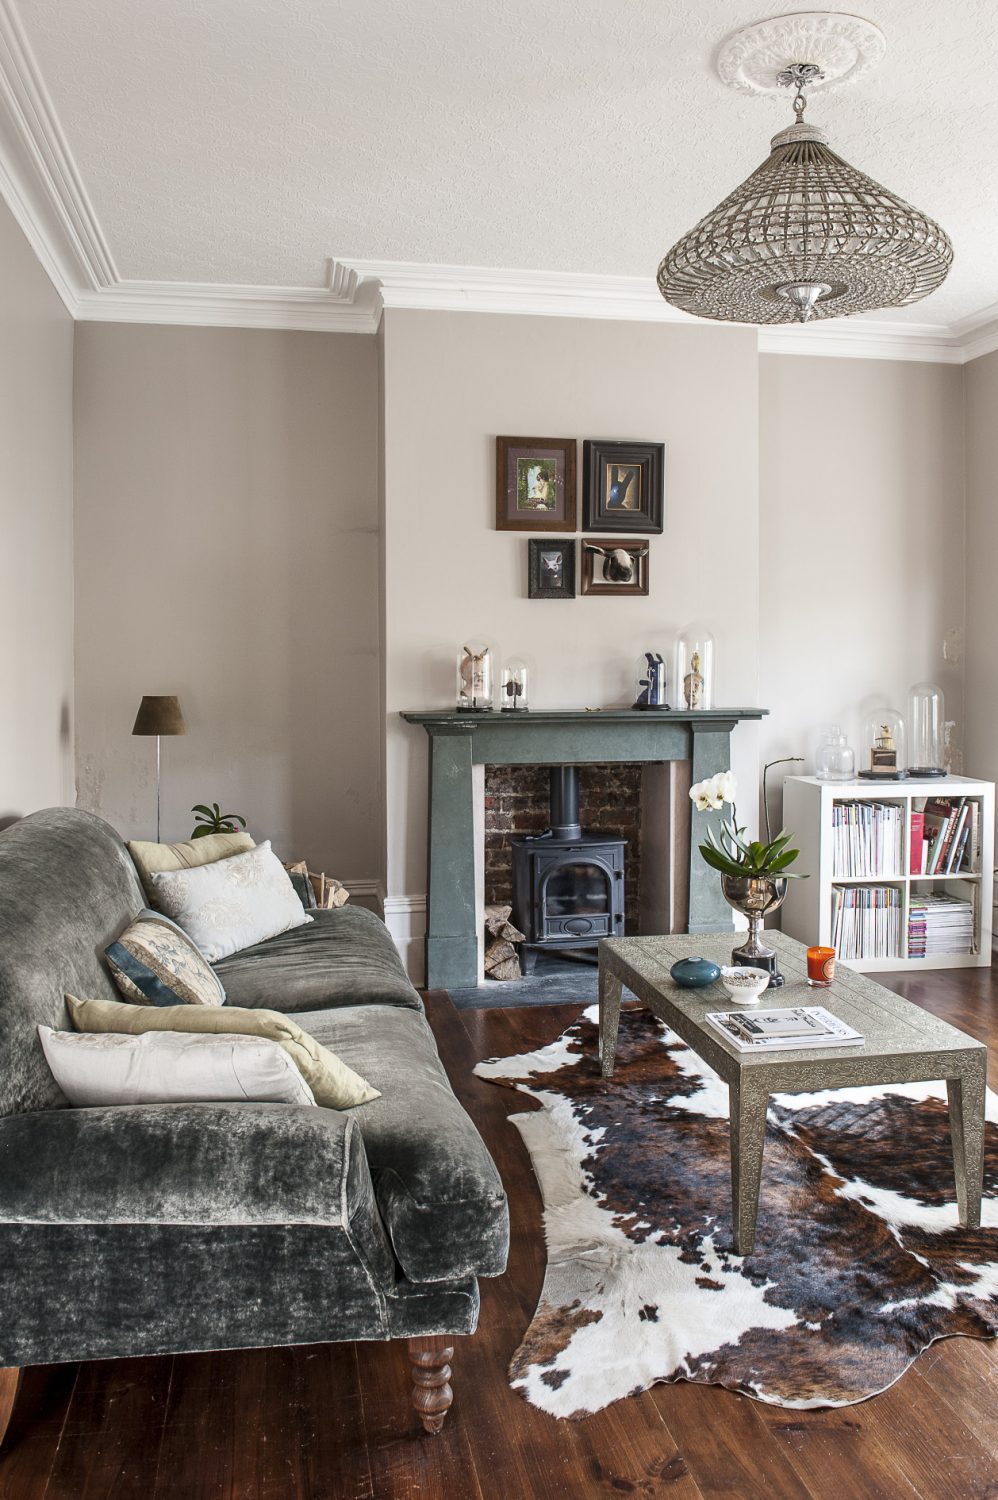 Grey is a predominant backdrop, blending into all the individual schemes within each room and seamlessly uniting the whole house together